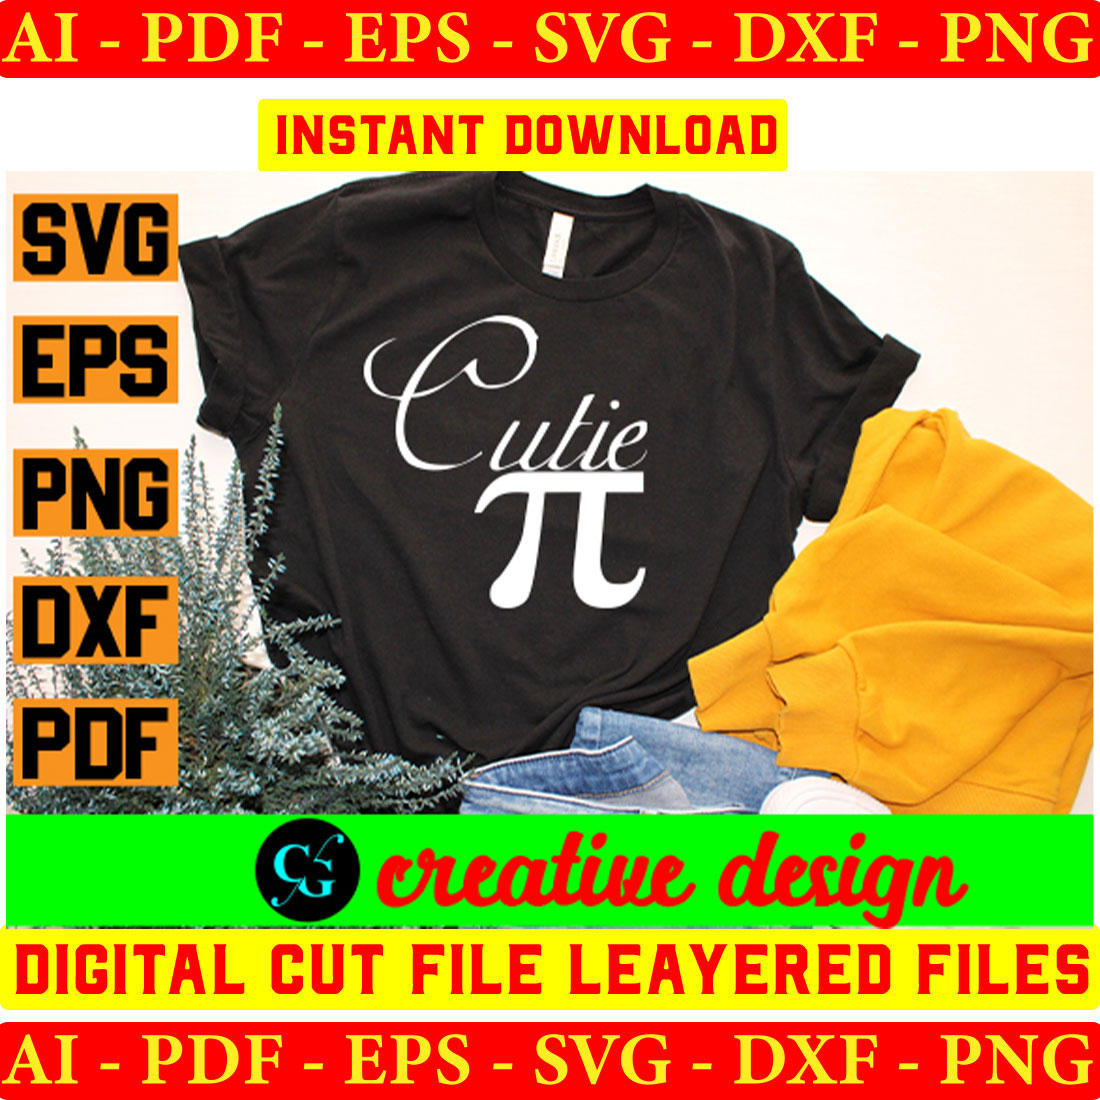 T - shirt that says cutie cutie layered files.